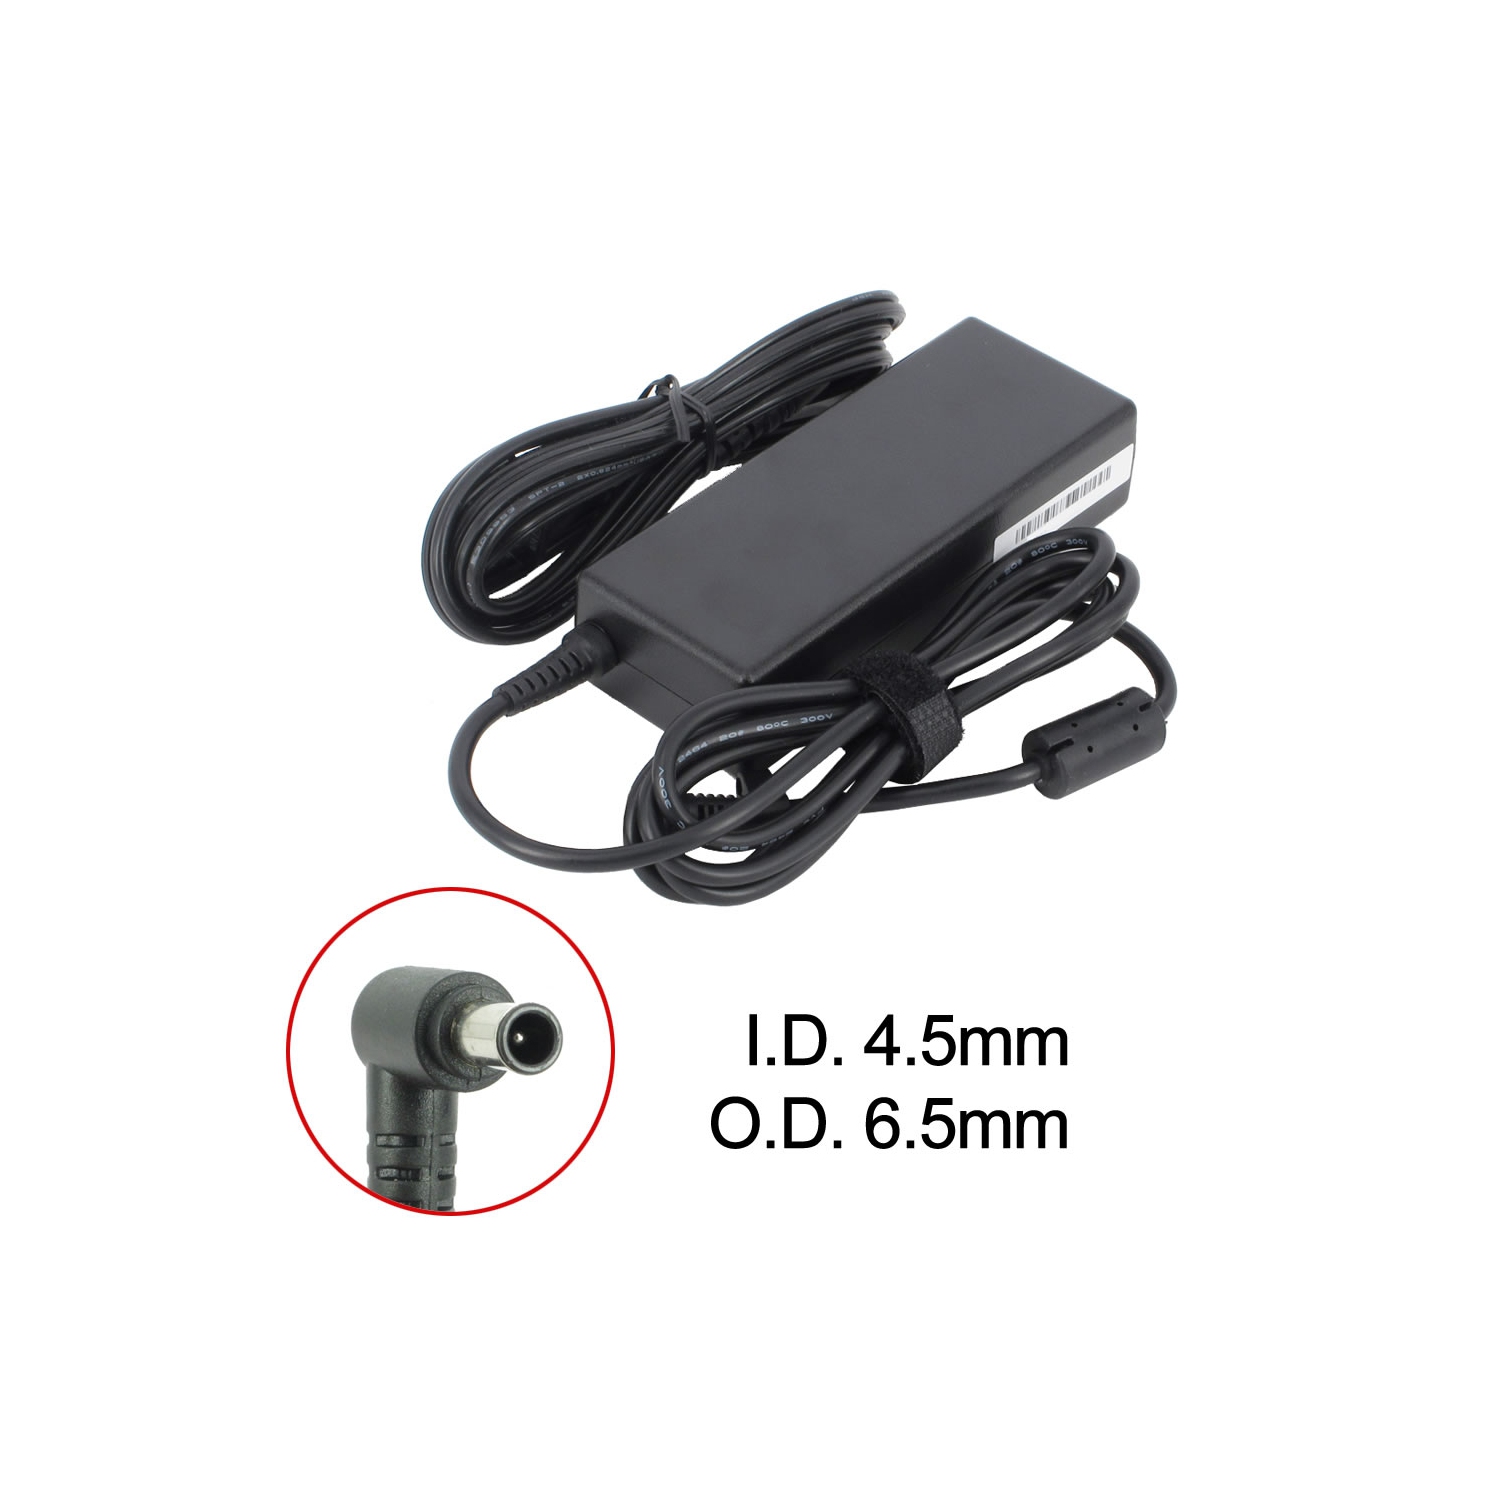 Brand New Laptop AC Adapter for Sony VAIO VGN-SZ Series, PCGA-AC19V12, VGP-AC19V11, VGP-AC19V22, VGP-AC19V32, VGP-AC19V71